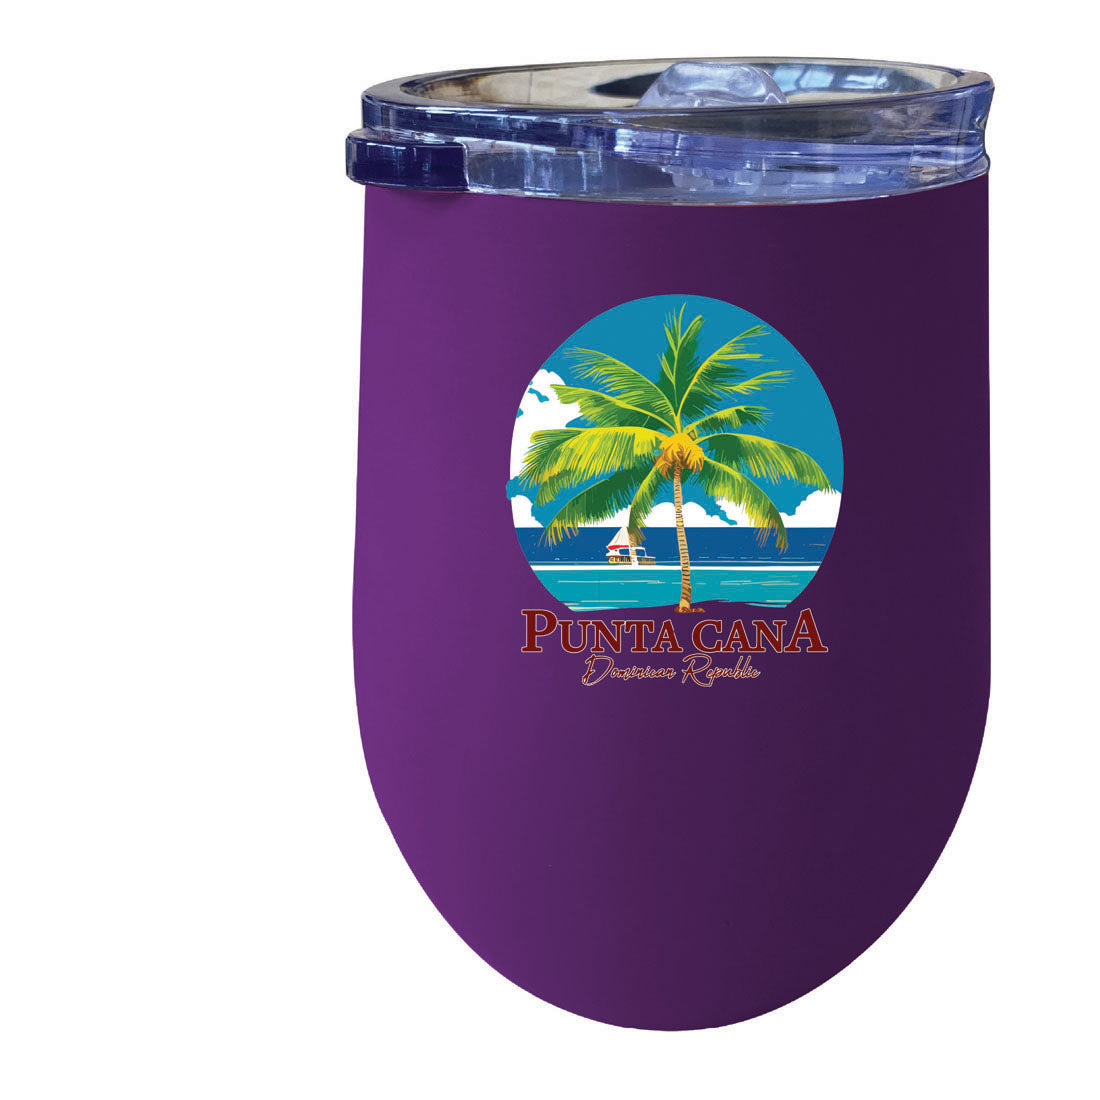 Punta Cana Dominican Republic Souvenir 12 Oz Insulated Wine Stainless Steel Tumbler - Purple, PARROT